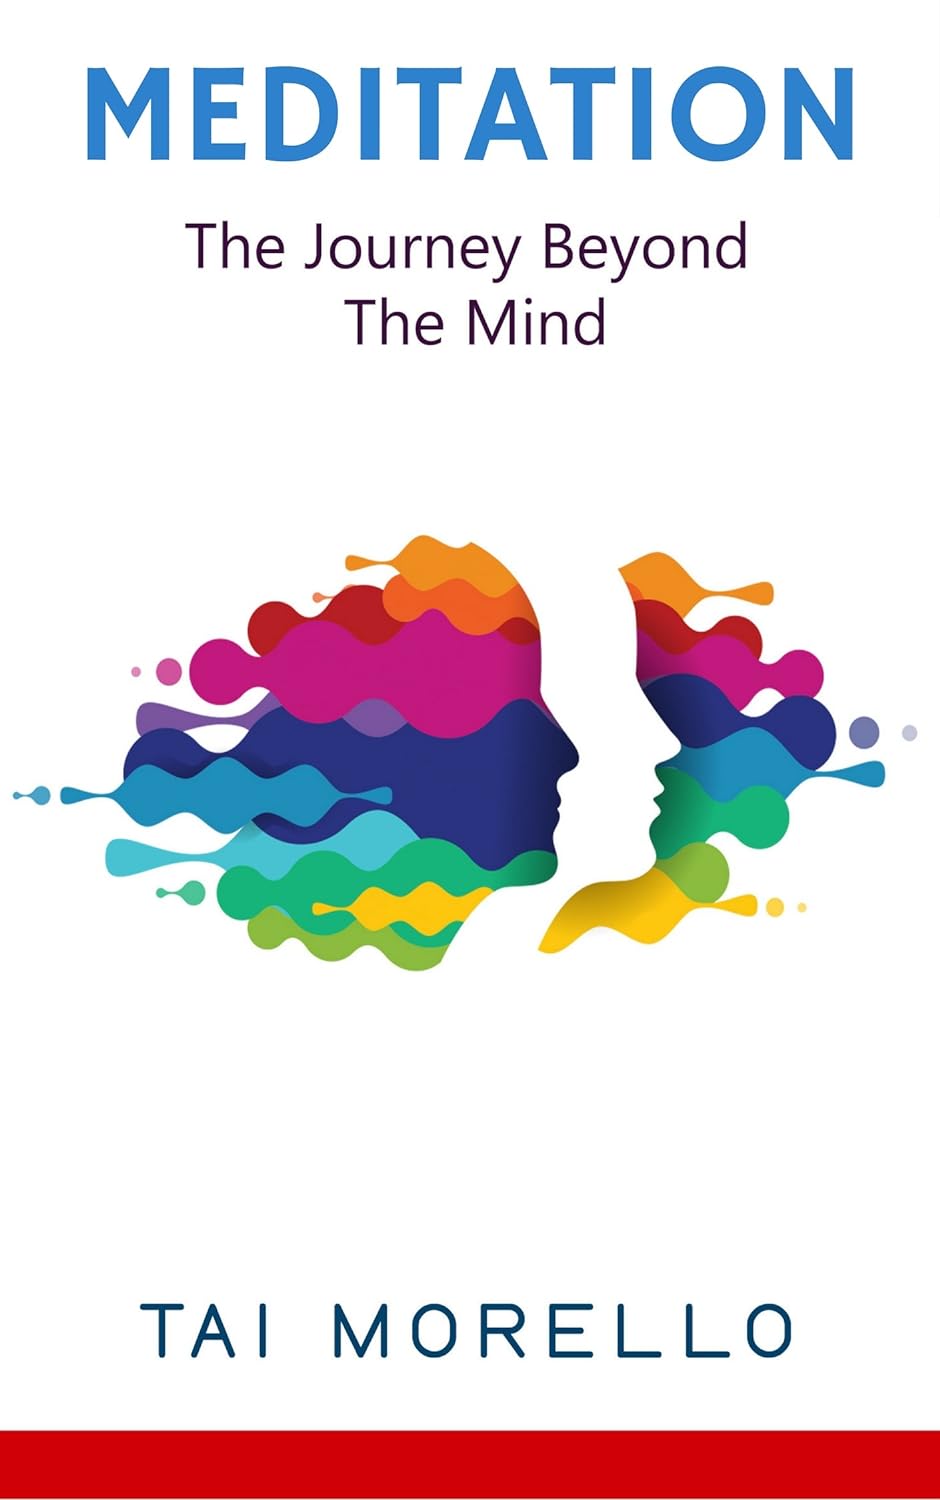 Meditation: The Journey Beyond The Mind by Bestselling Author Tai Morello